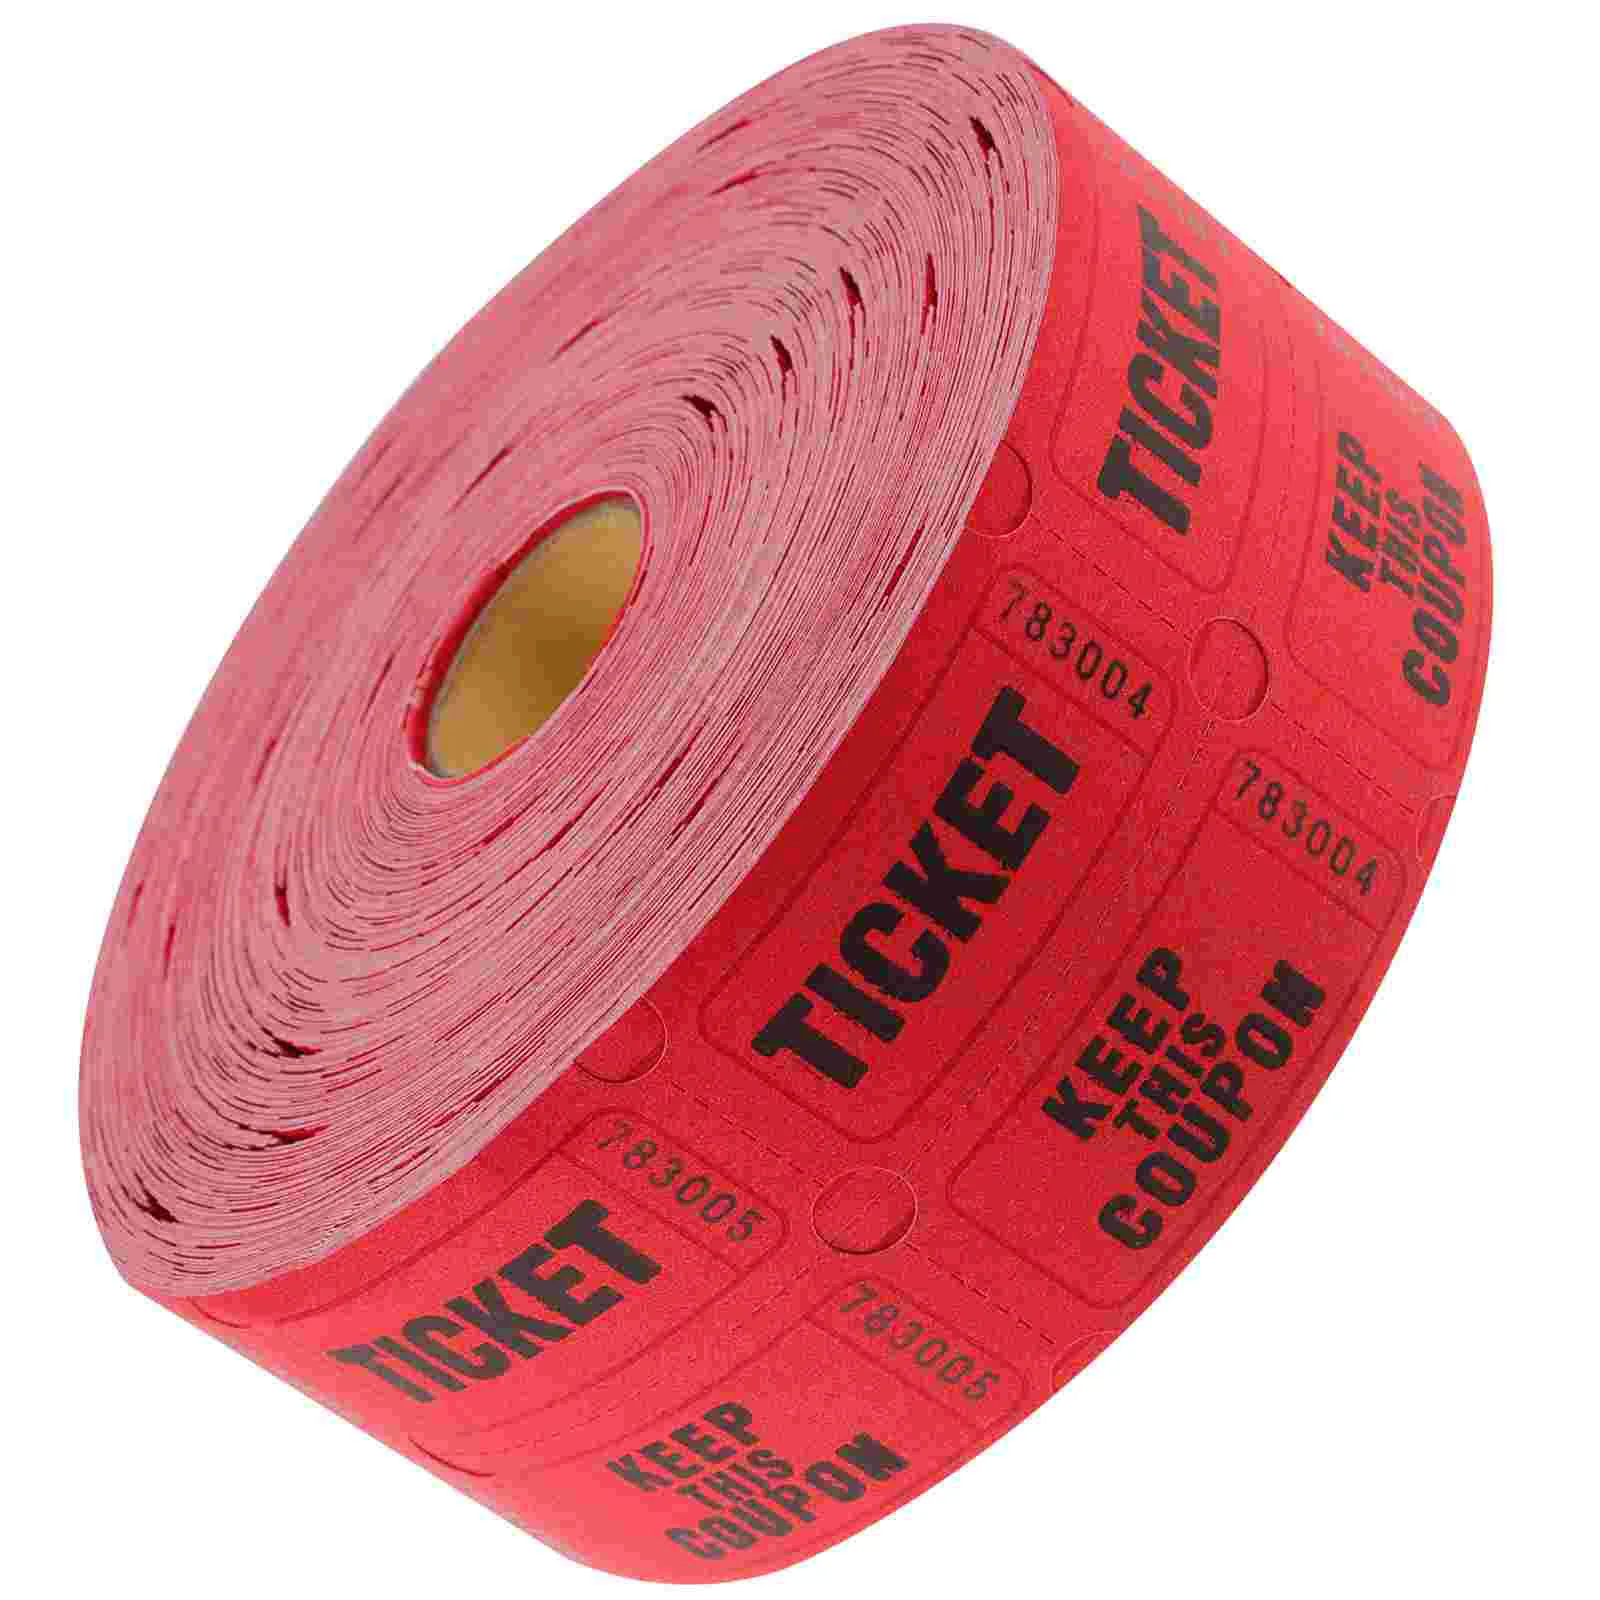 

Lottery Ticket Label Rolls Tickets Concert Bulk Drink Events Movie Coated Paper The Raffle